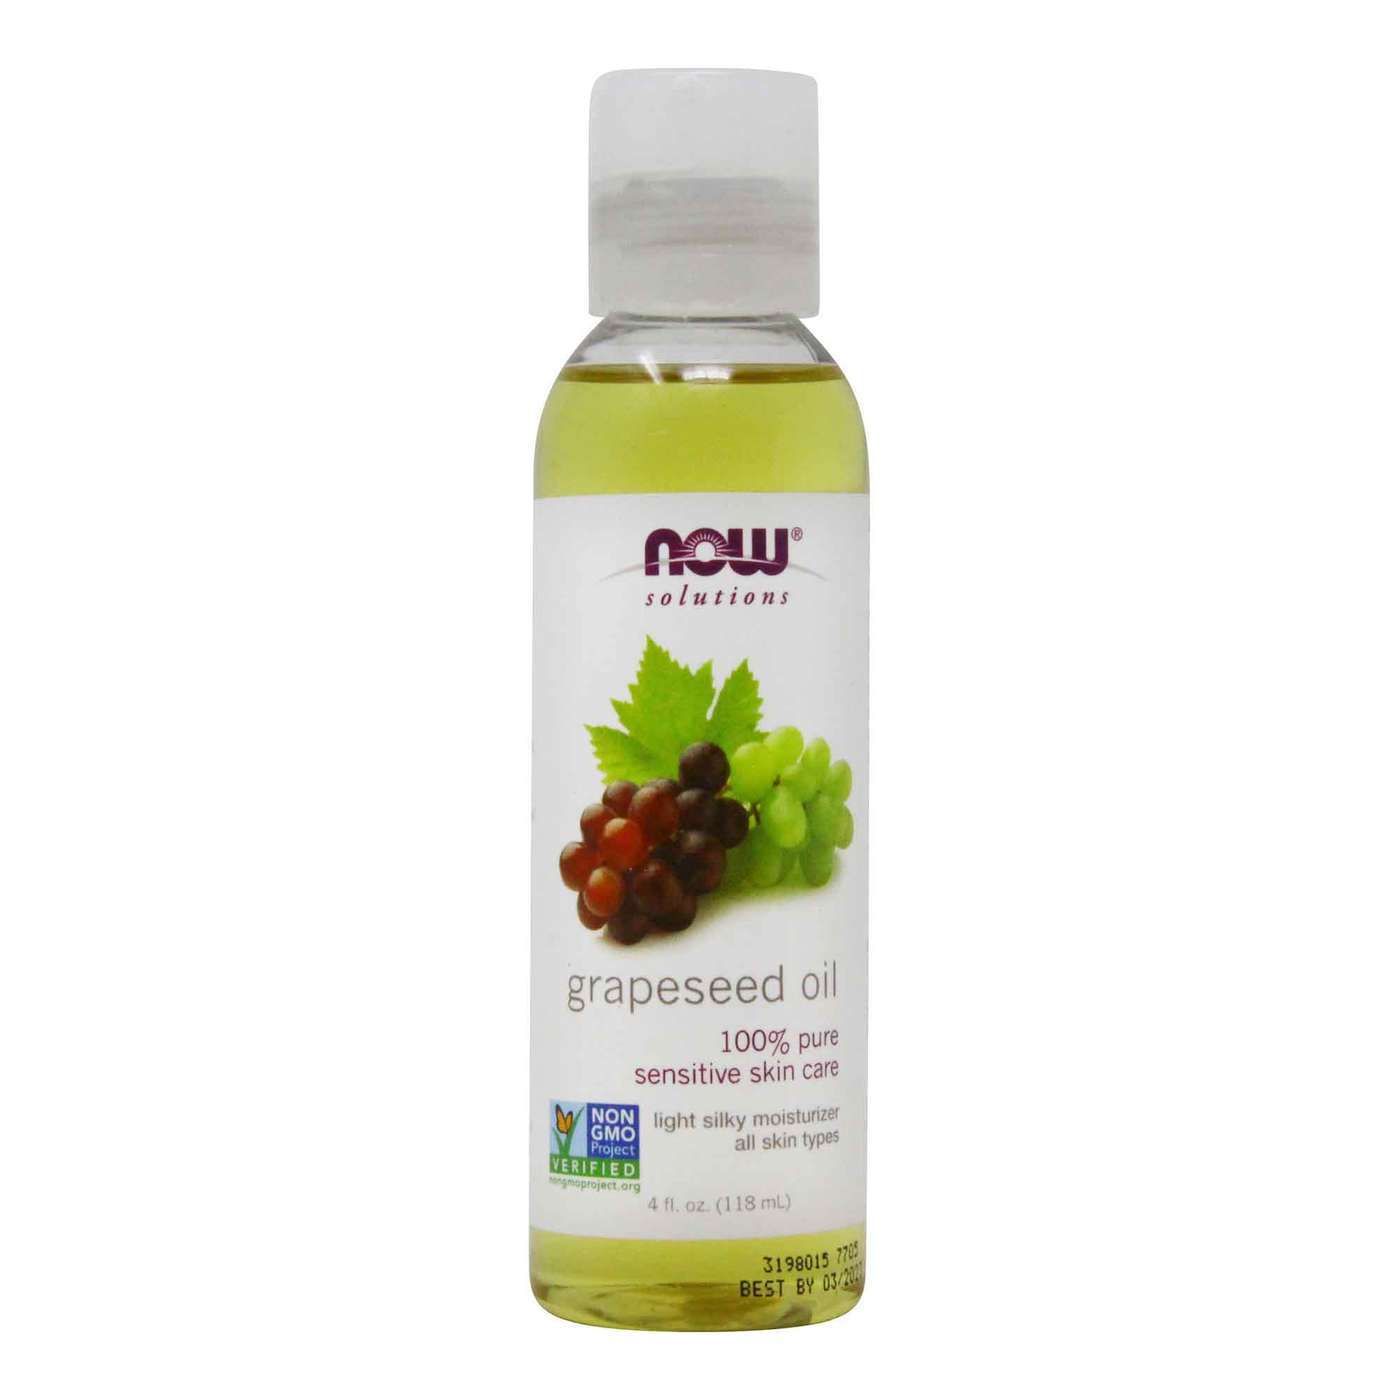  NOW GRAPESEED OIL 4 OZ (118 ML) 